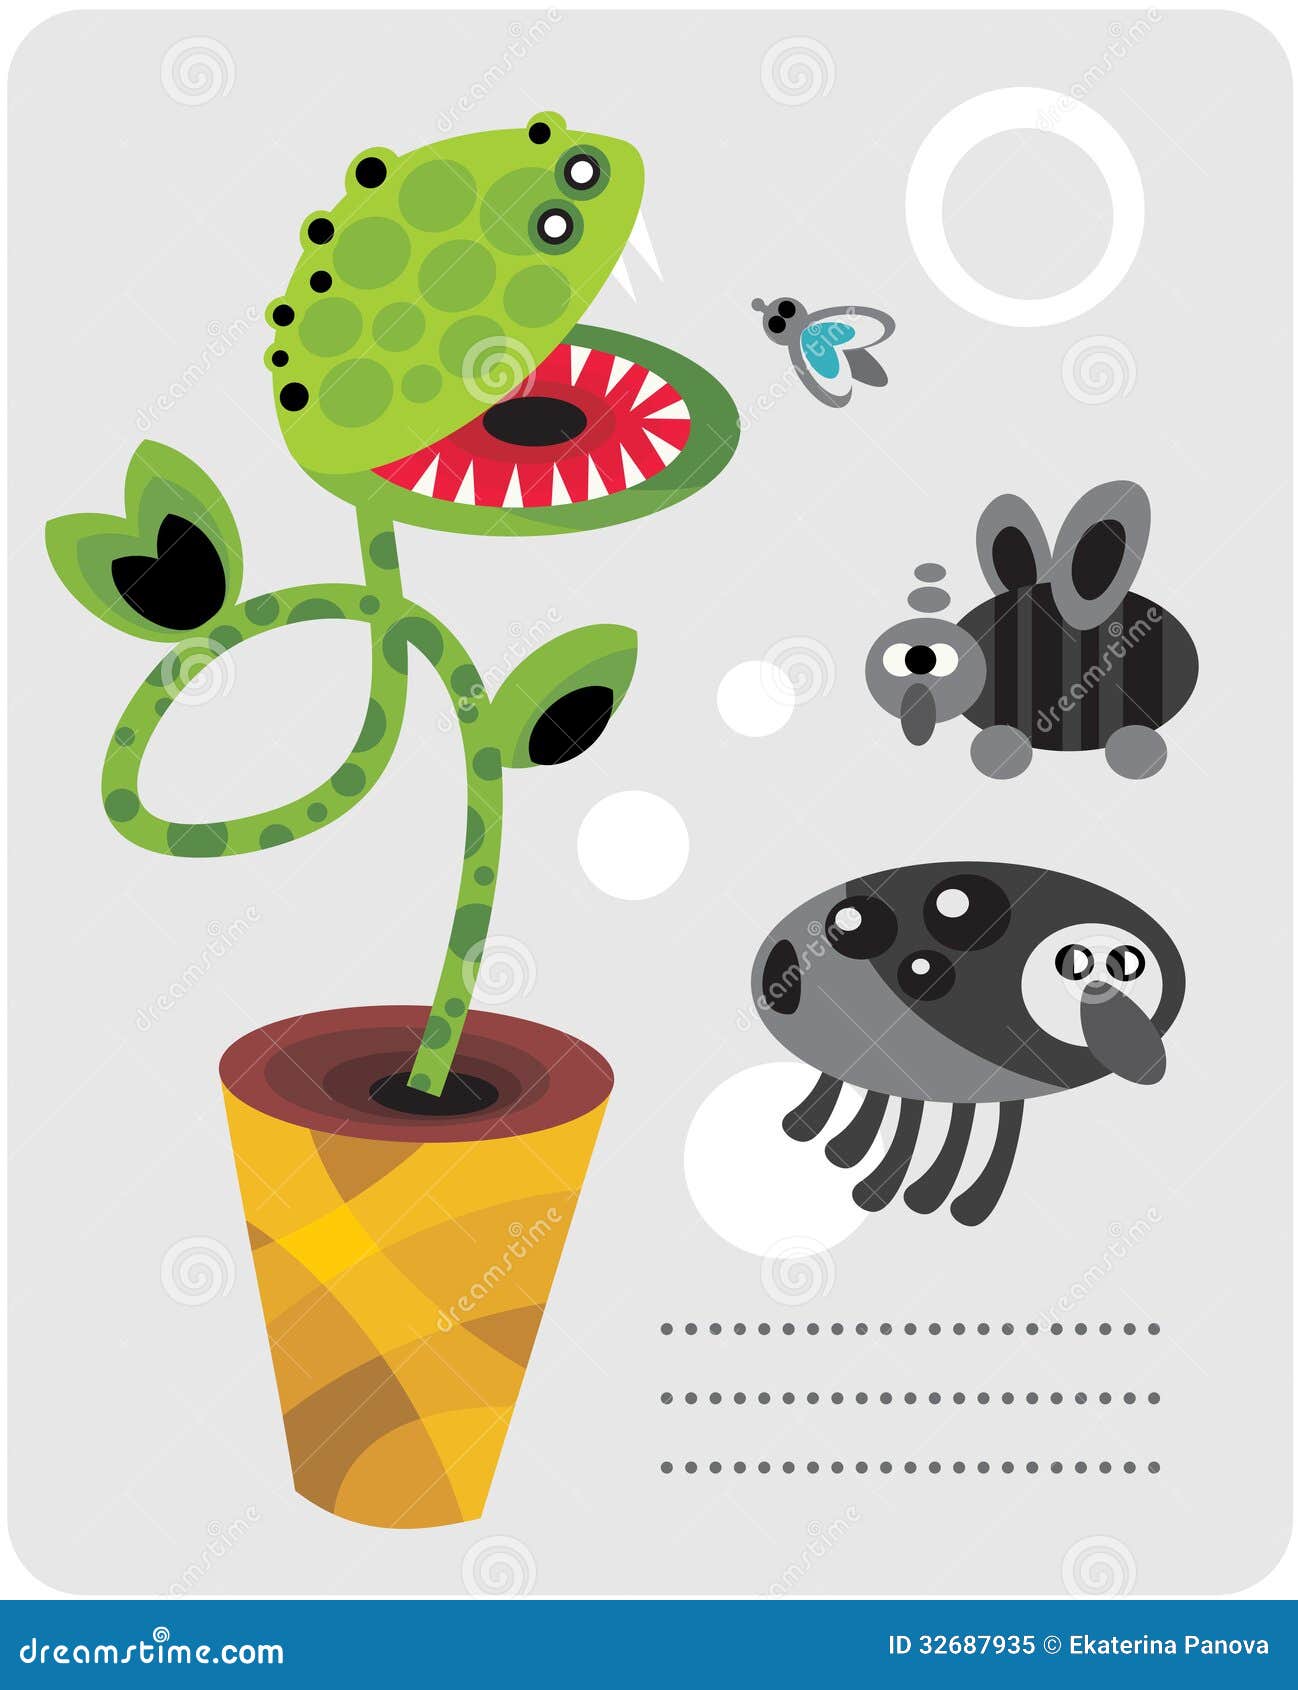 Flower monster. Cute plant monsters and insects.